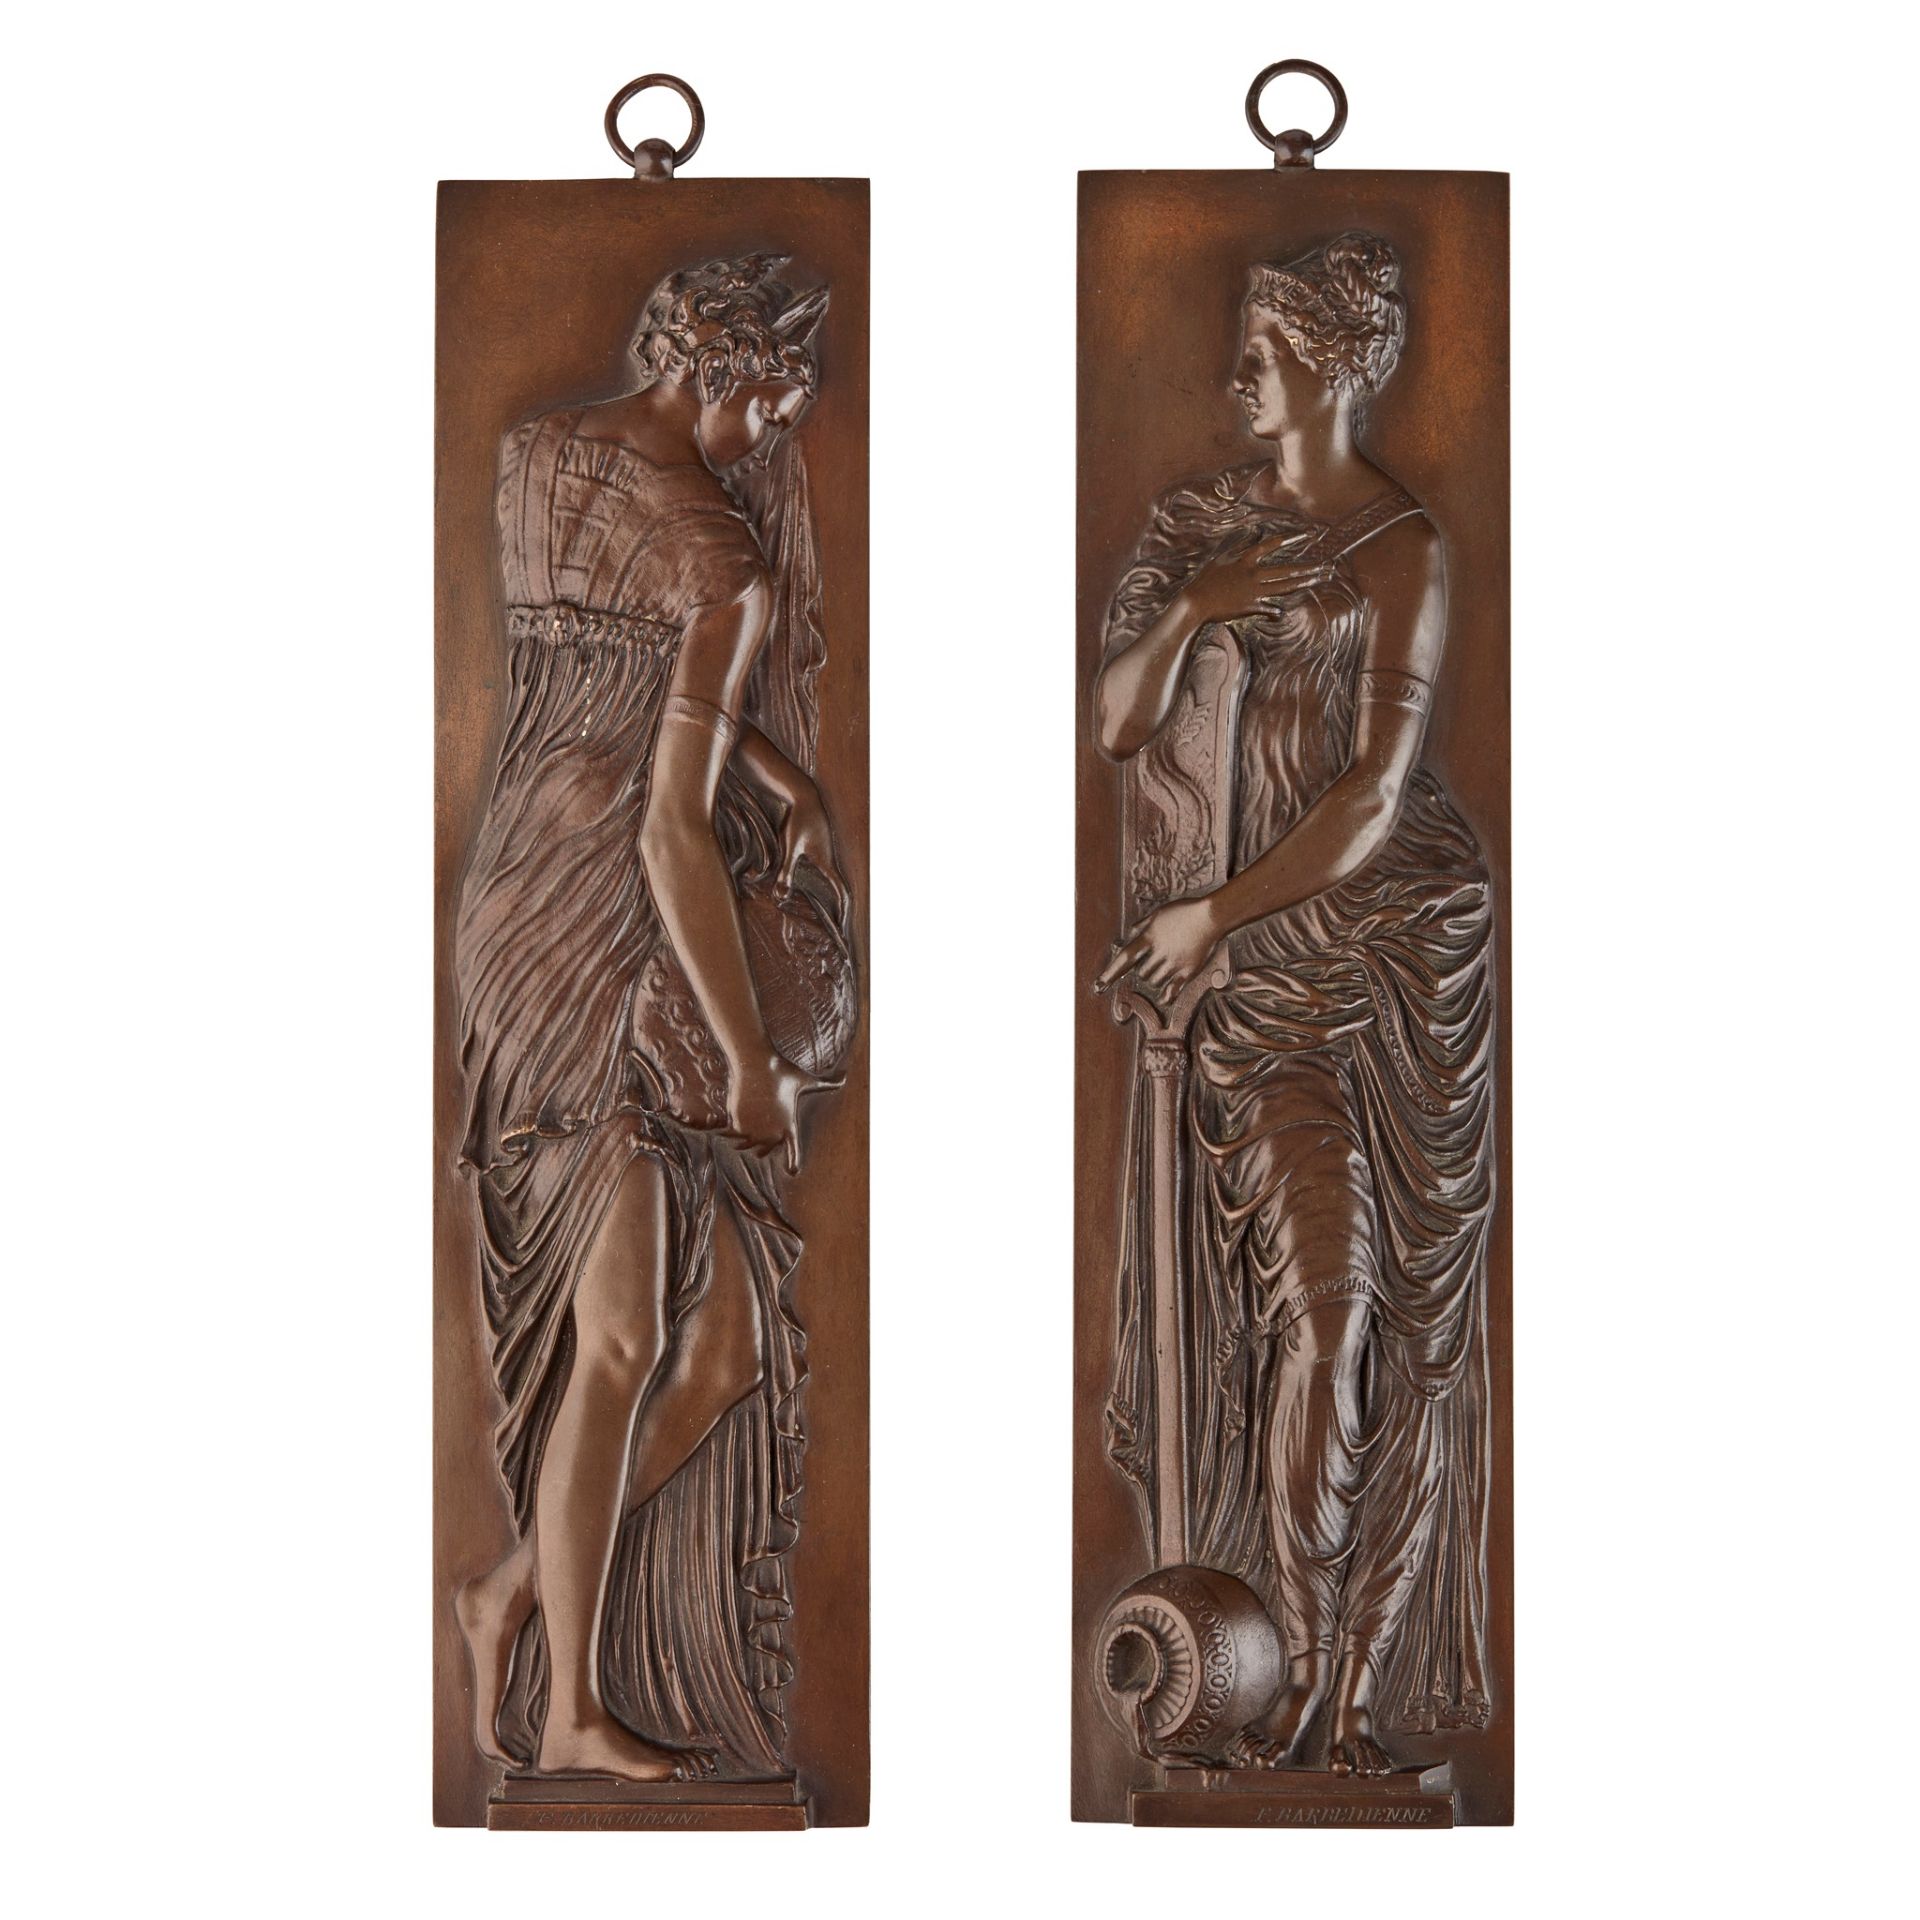 FERDINAND BARBEDIENNE (1810-1892) PAIR OF WALL PLAQUES, CIRCA 1870